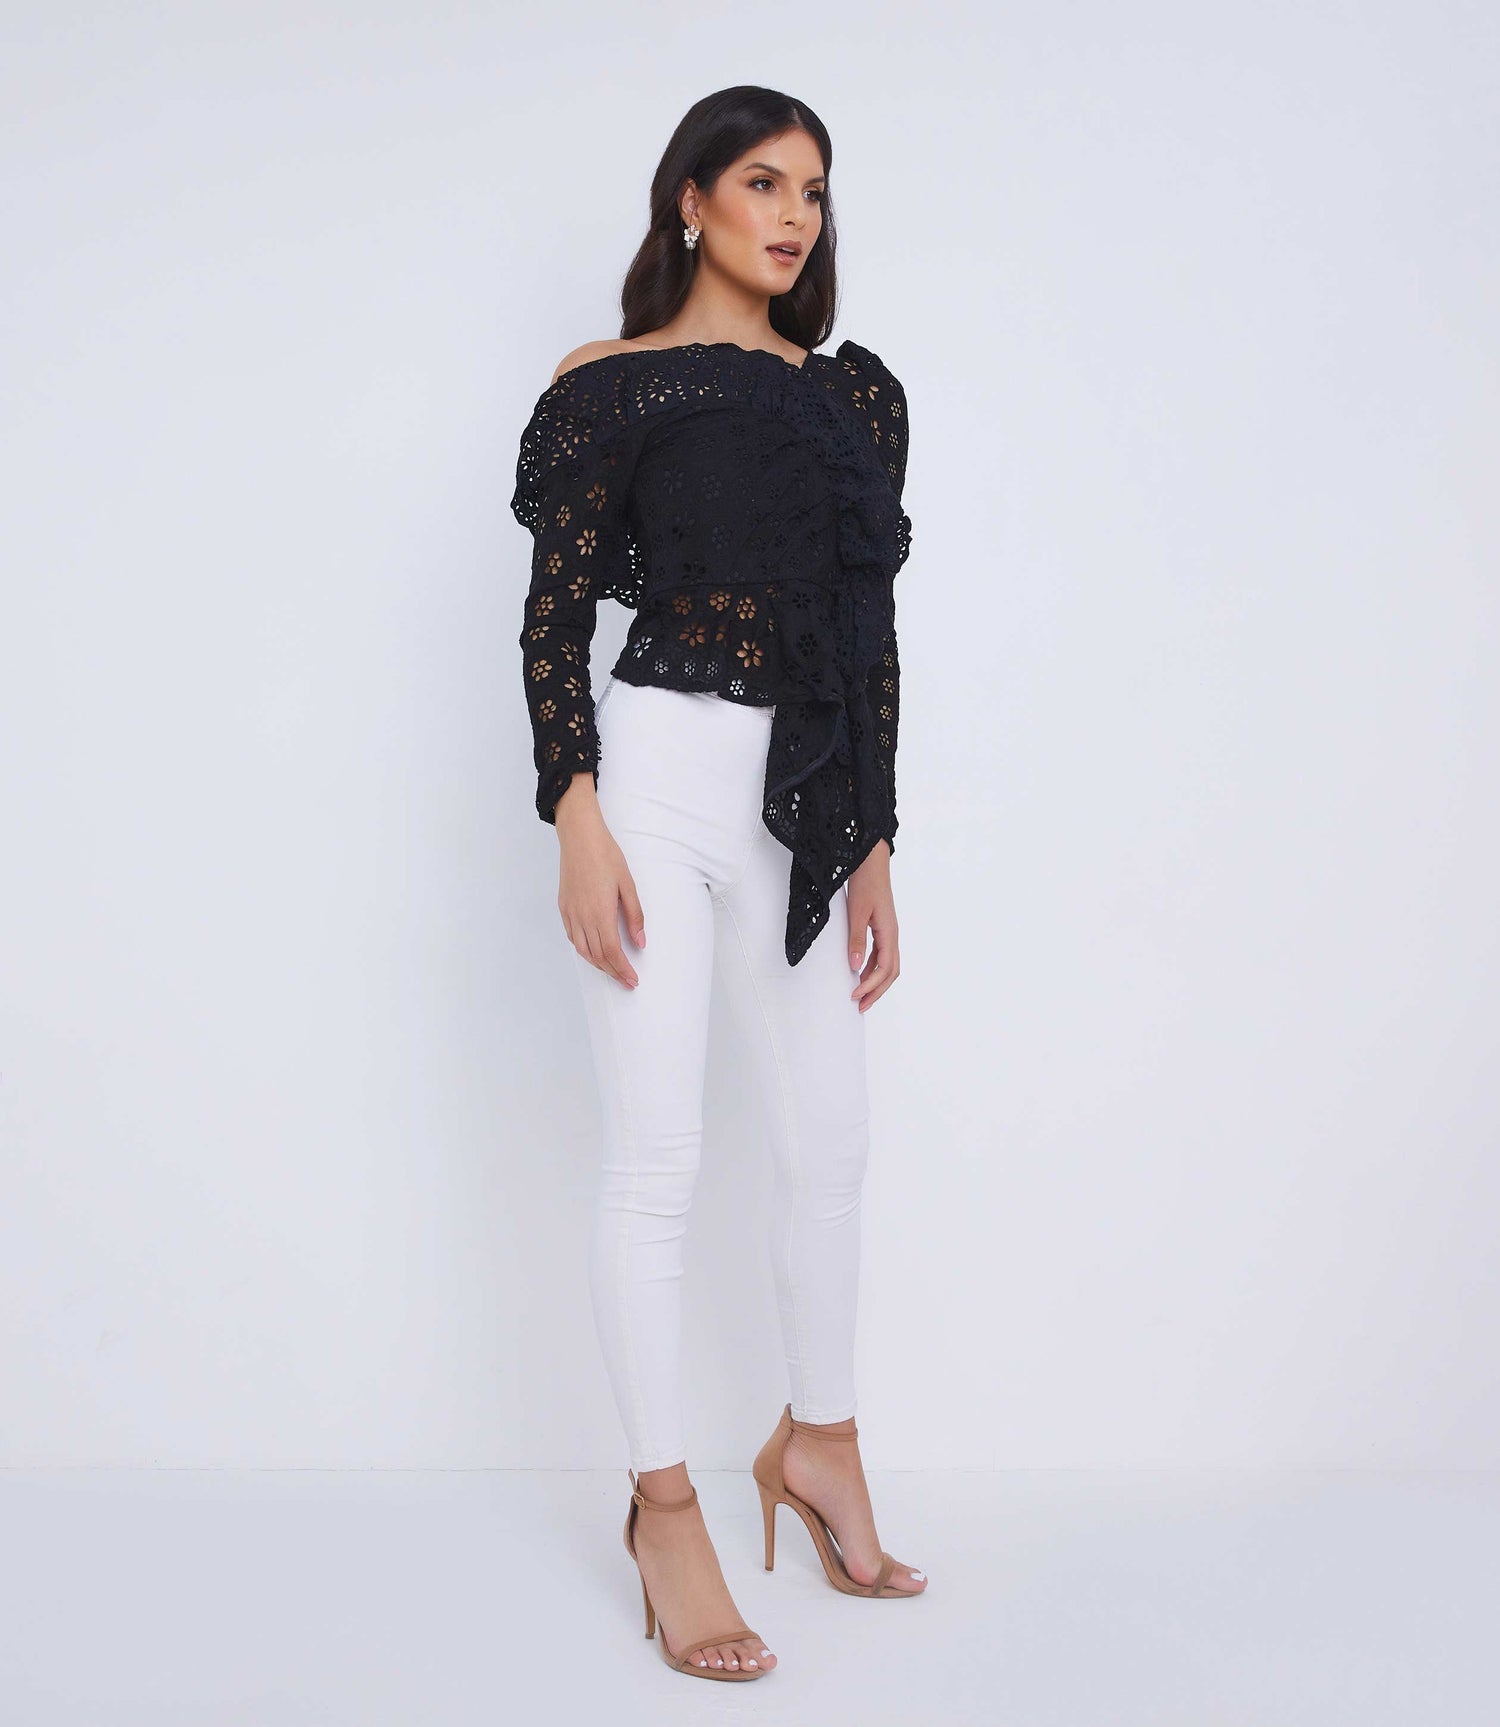 Black lace ruffle off the shoulder going out summer top